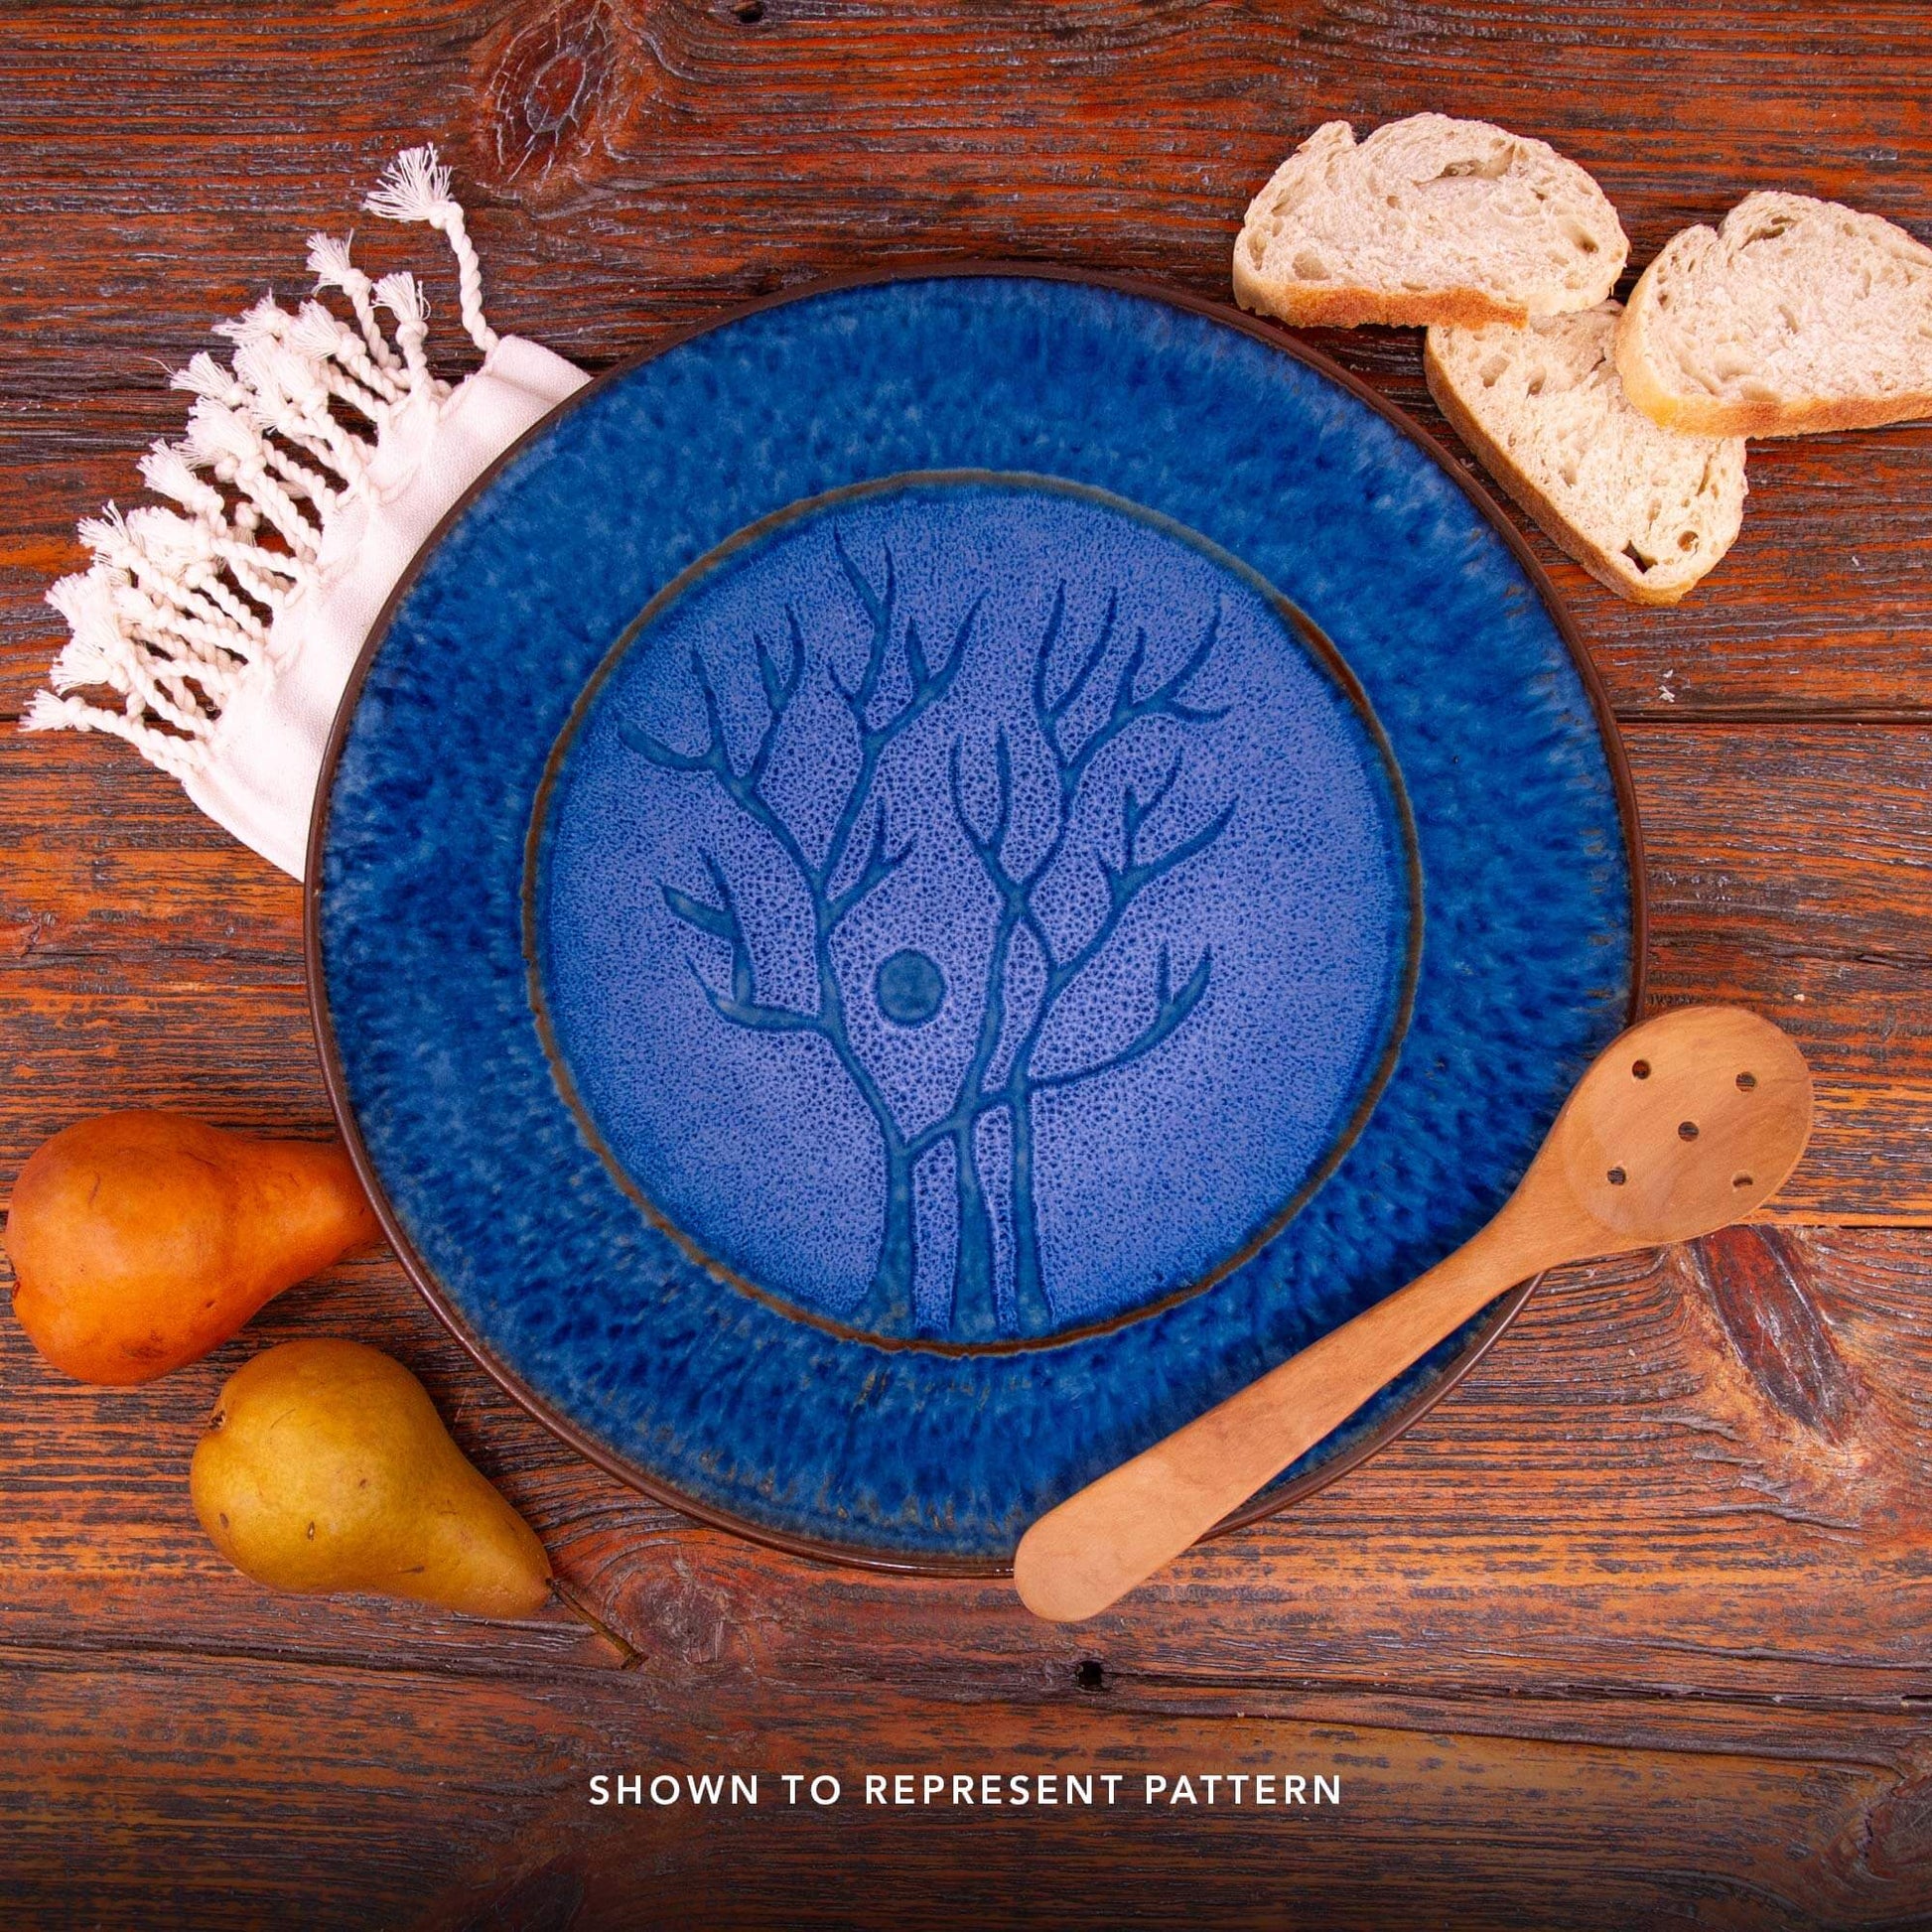 Handmade Pottery Serving Pasta Bowl in Blue Tree pattern made by Georgetown Pottery in Maine